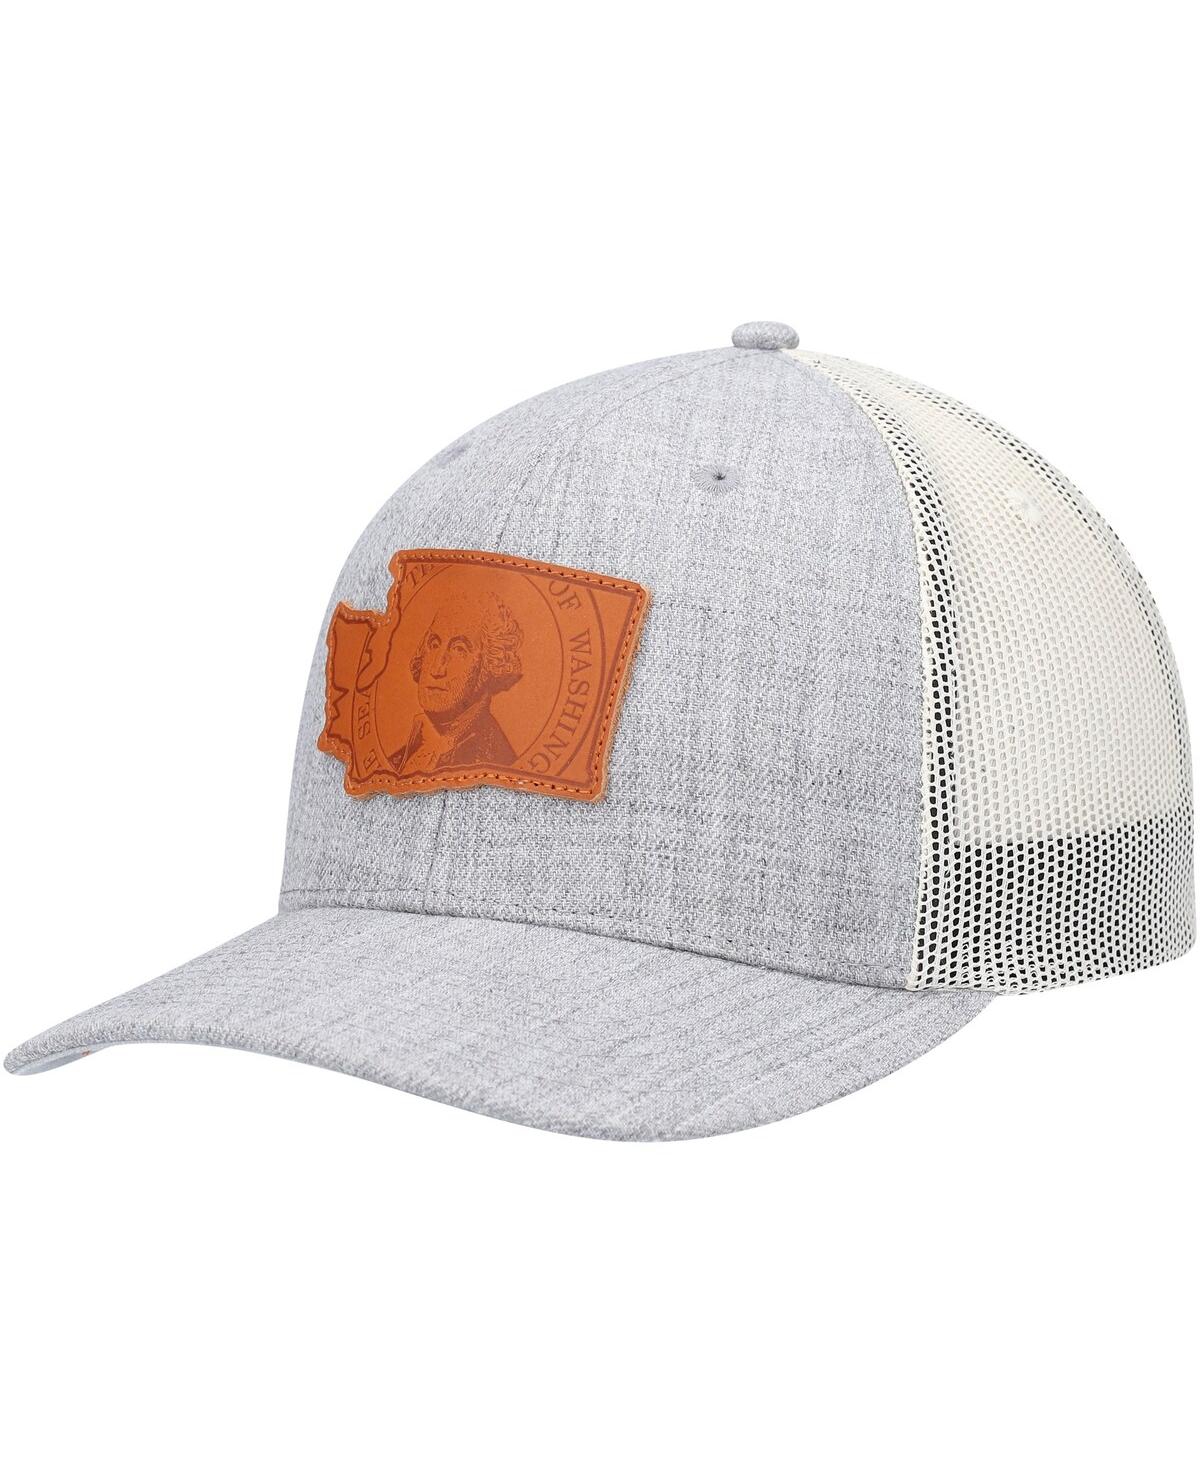 Shop Local Crowns Men's  Heather Gray Washington Leather State Patch Trucker Snapback Hat In Heathered Gray